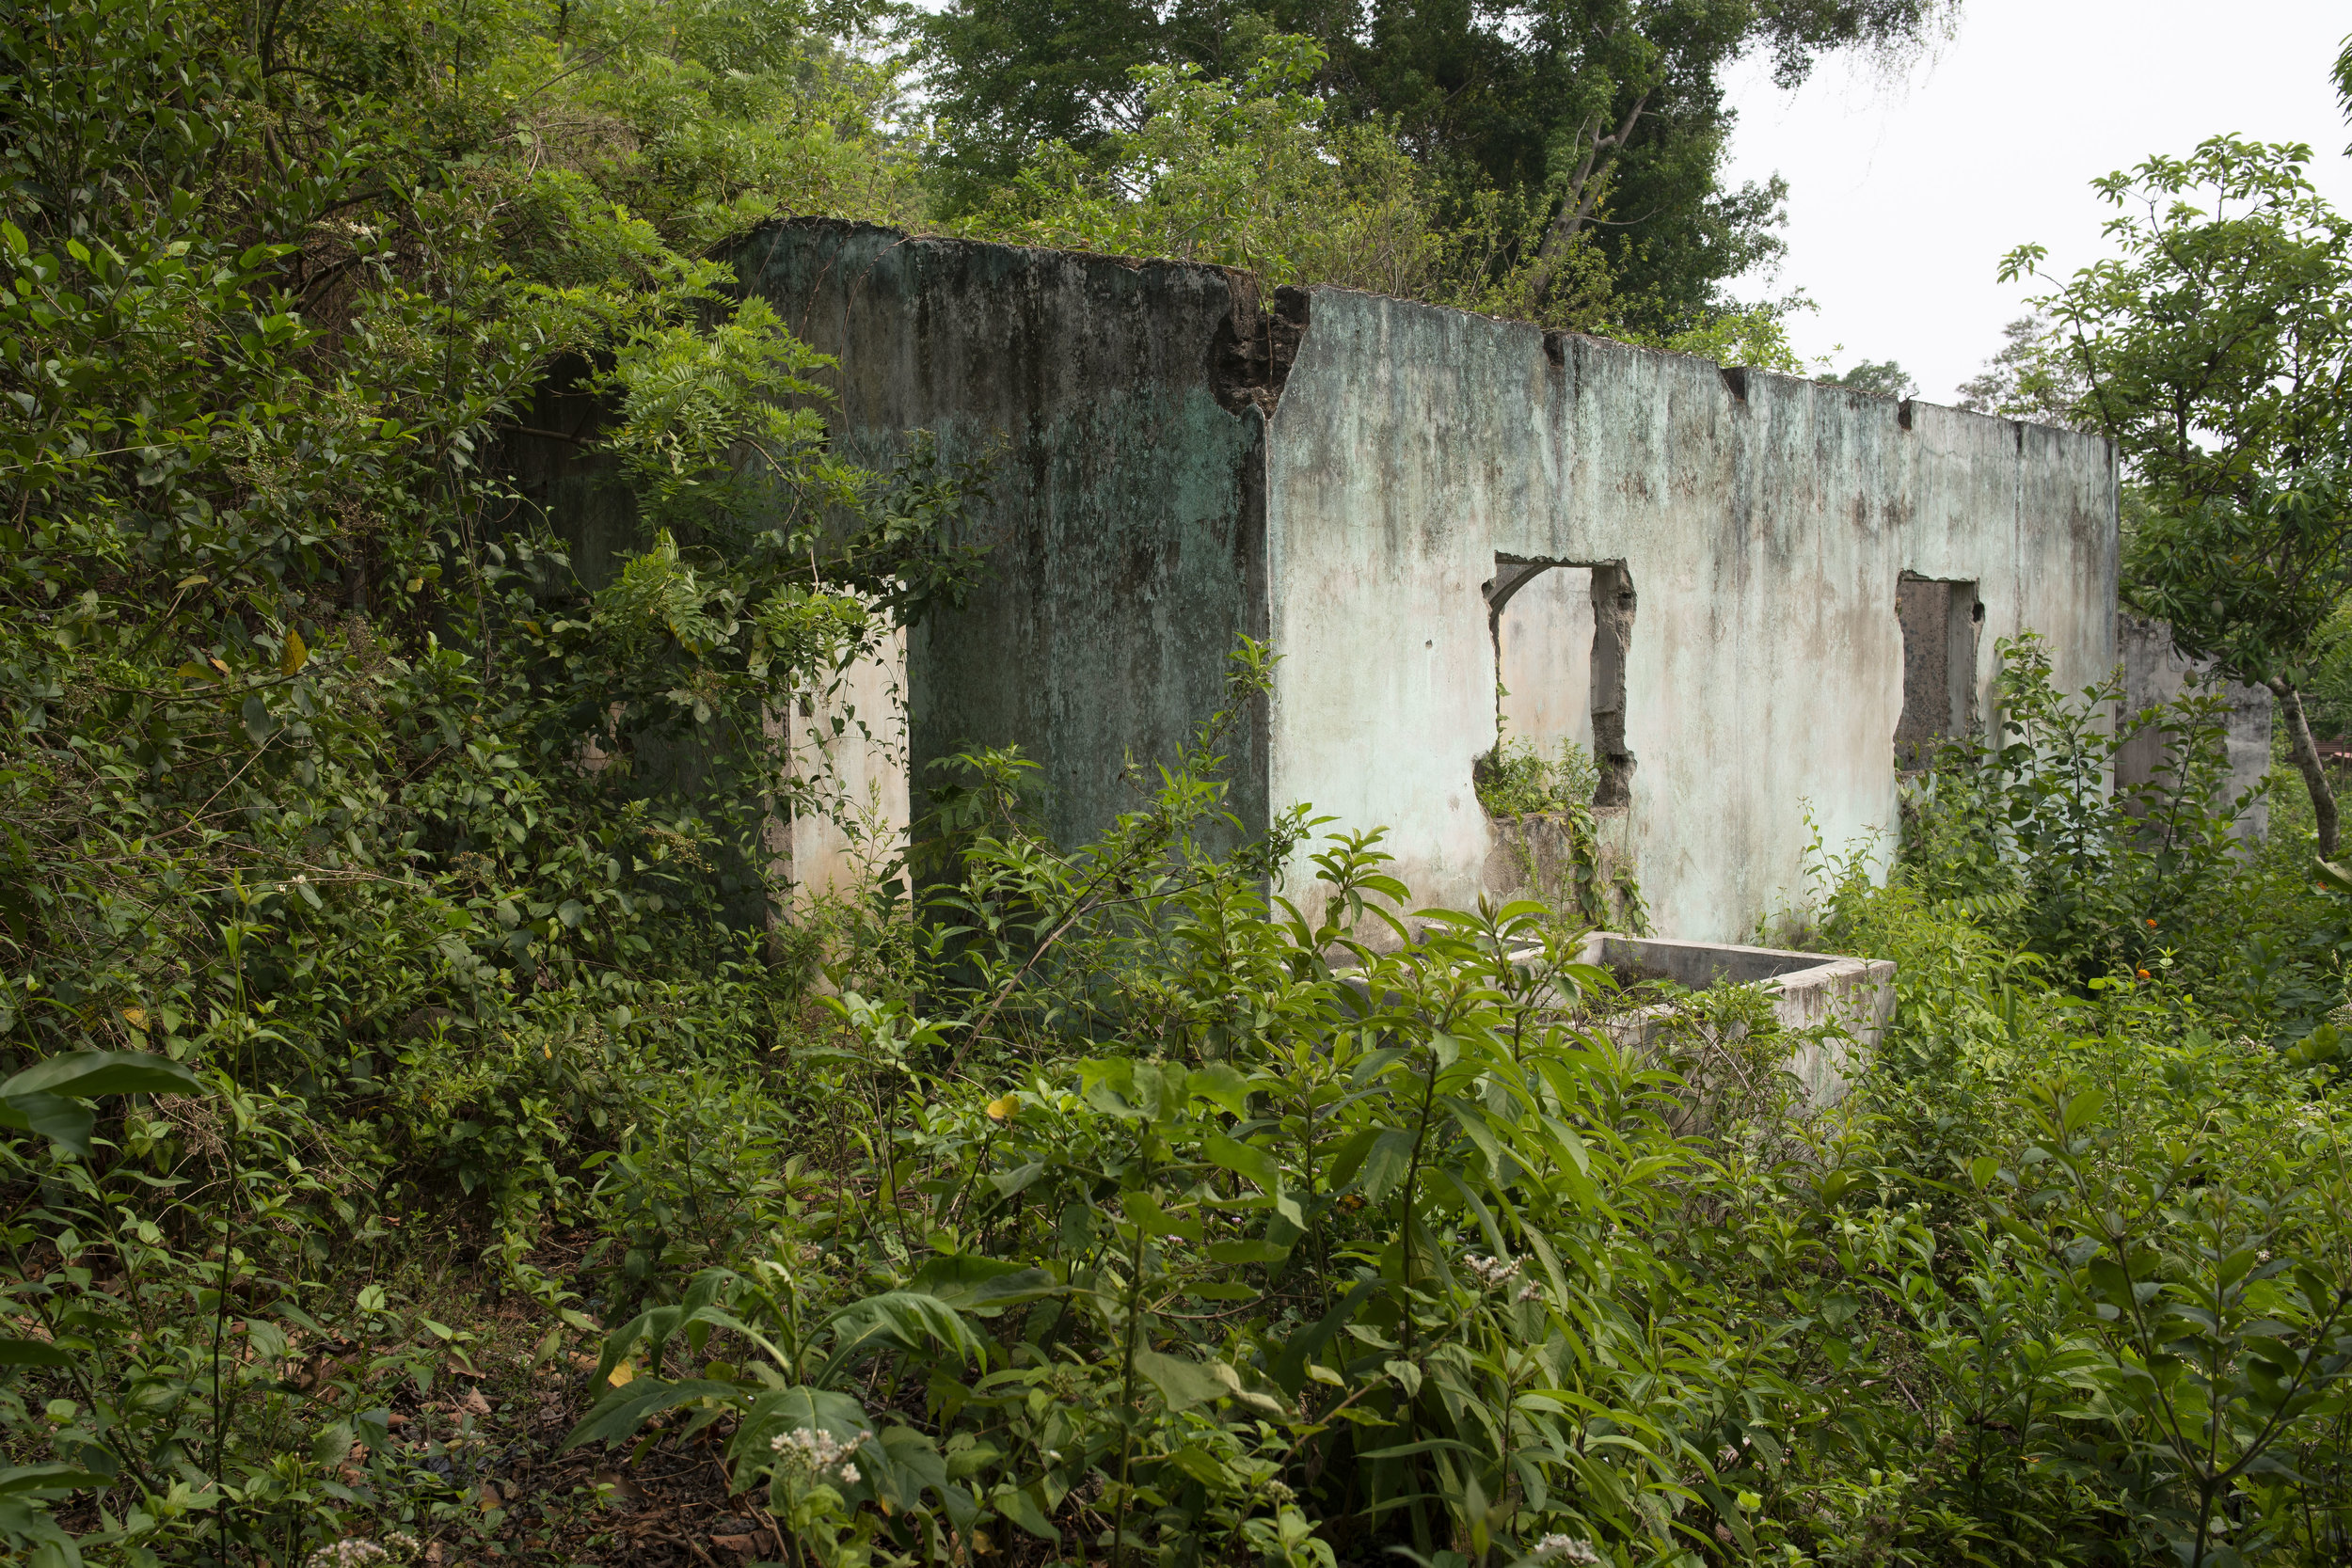  Homes abandoned by their owners fleeing gang violence. With 300 people leaving Honduras everyday, this sight is becoming more frequent throughout the country. Once left, these houses  are often looted of everything, including roofs and doors, within